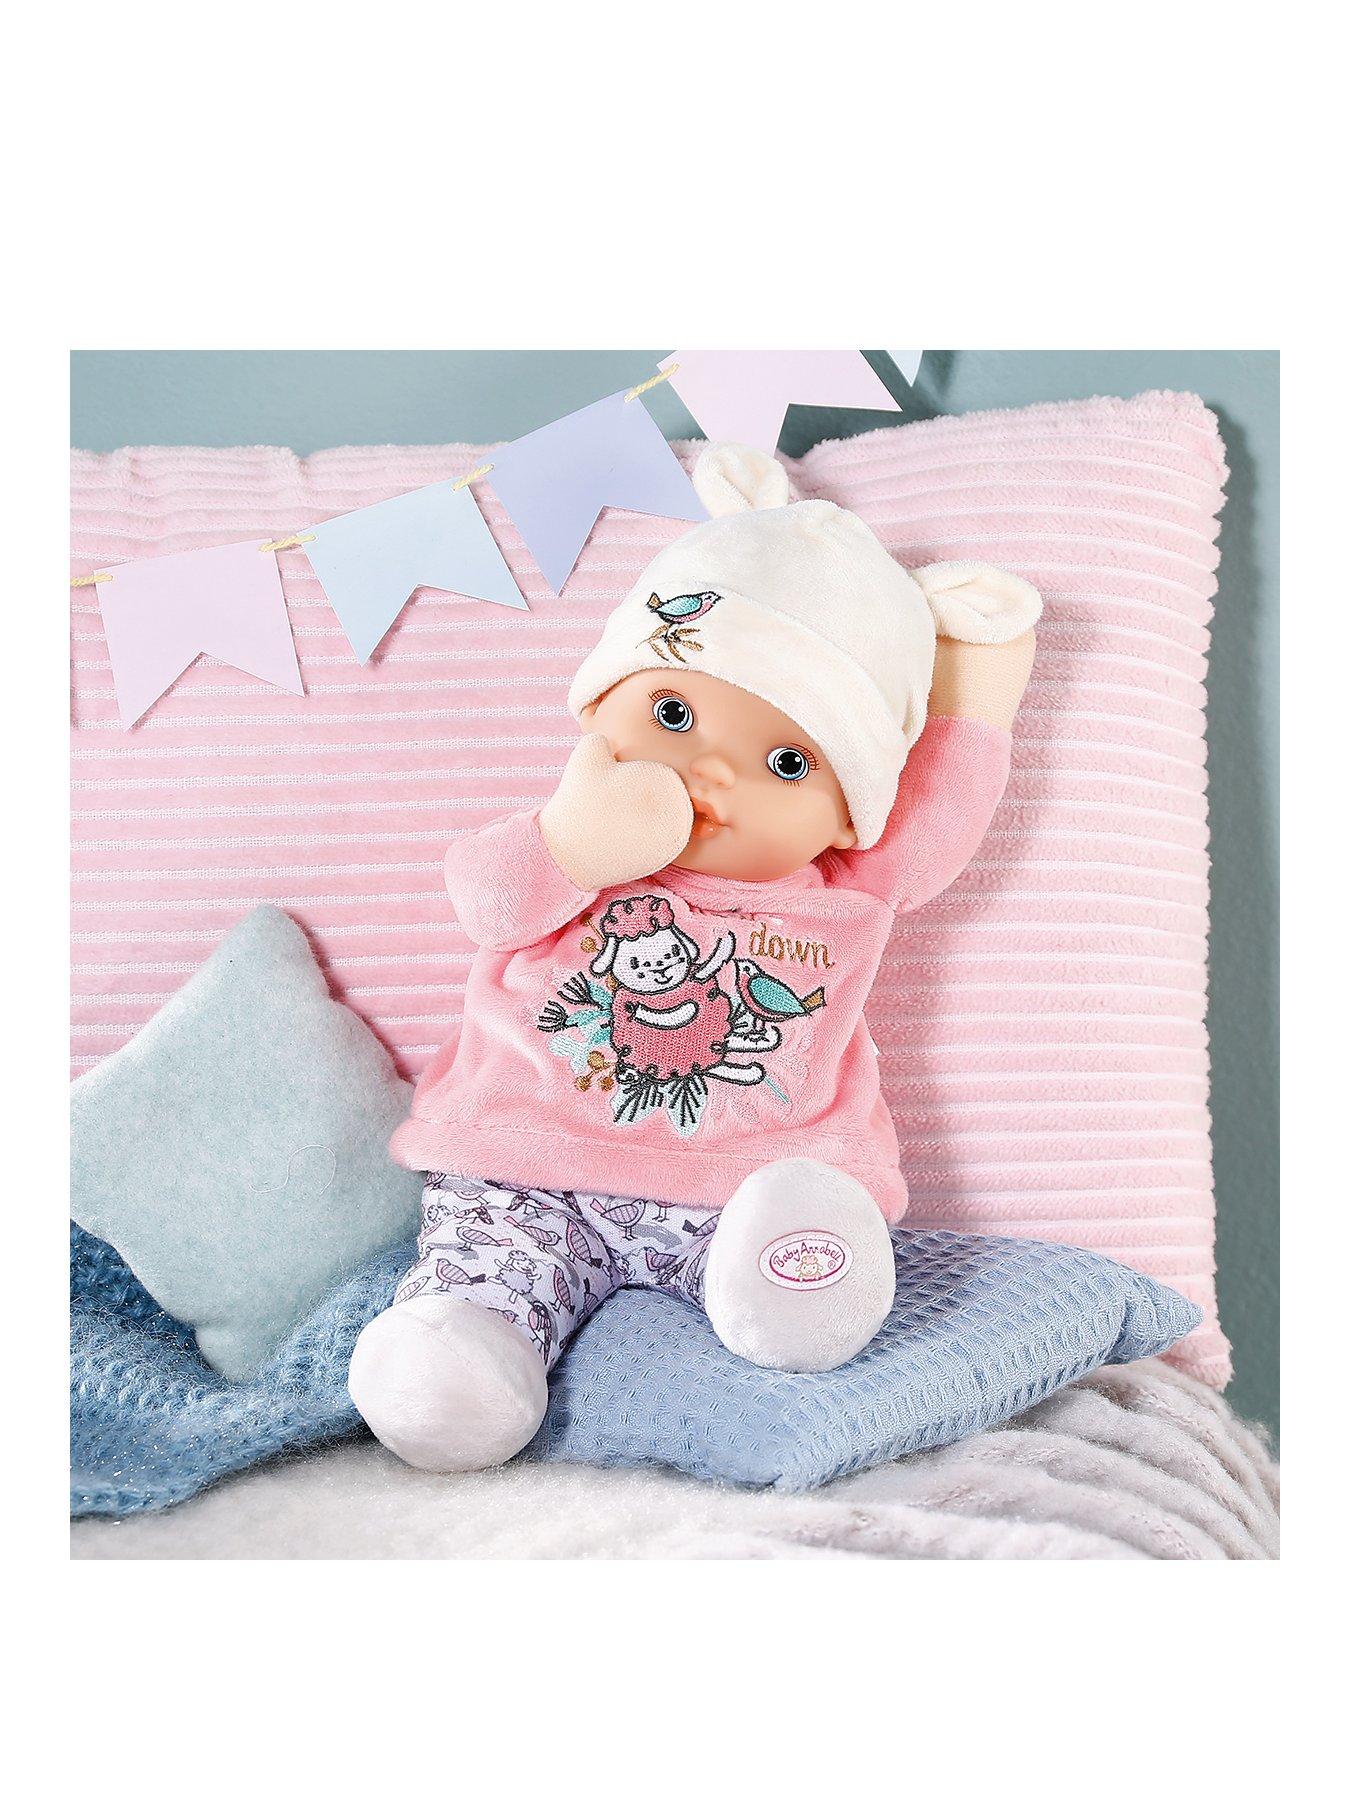 Baby Annabell Doll Accessories